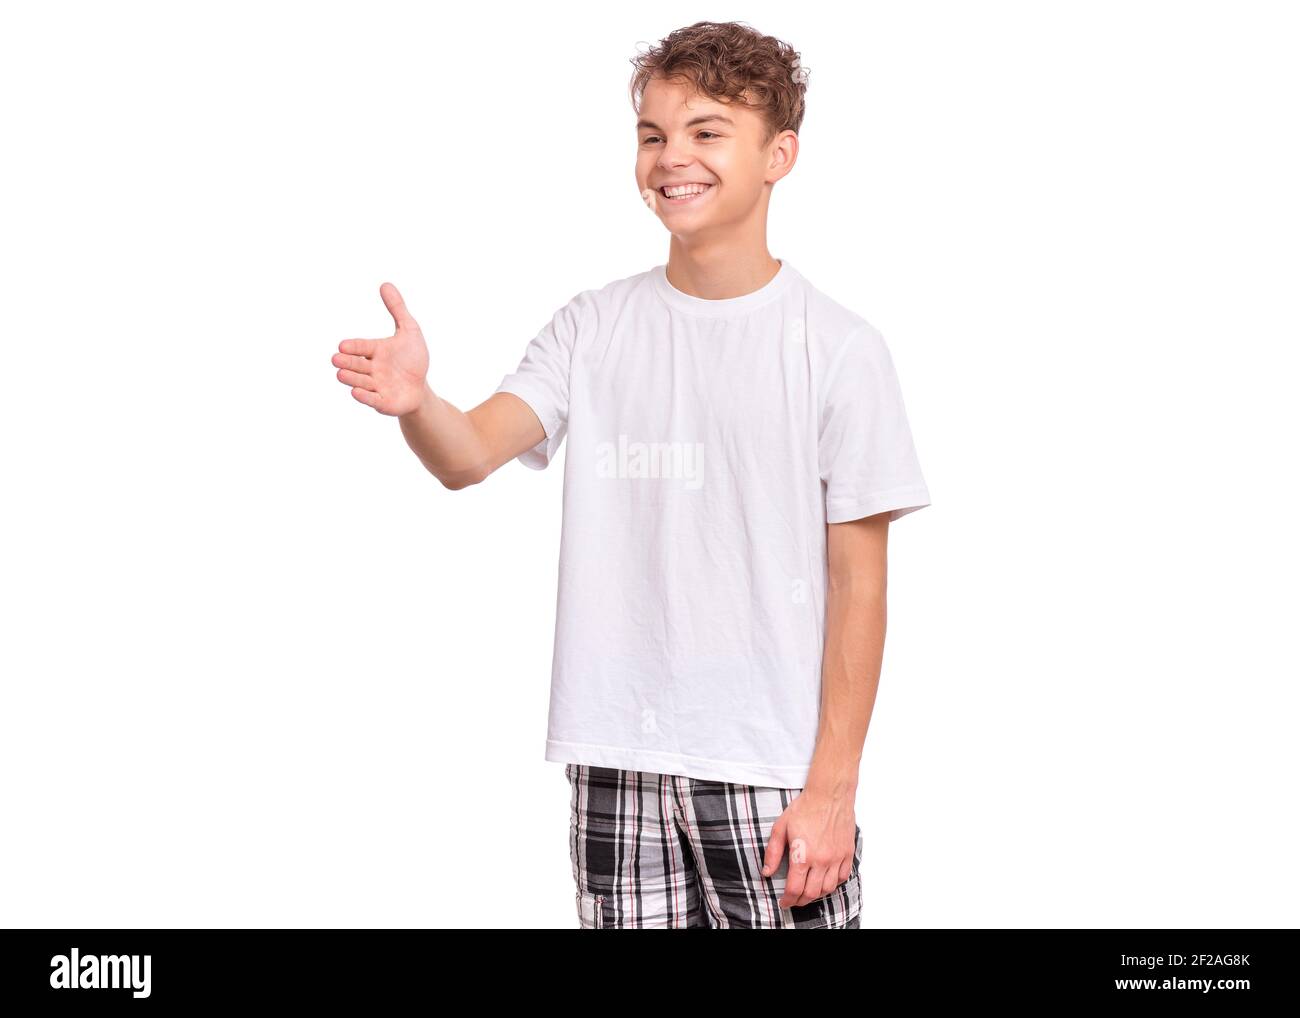 Handsome teen boy stretching his right hand up for greeting, isolated on white background Stock Photo